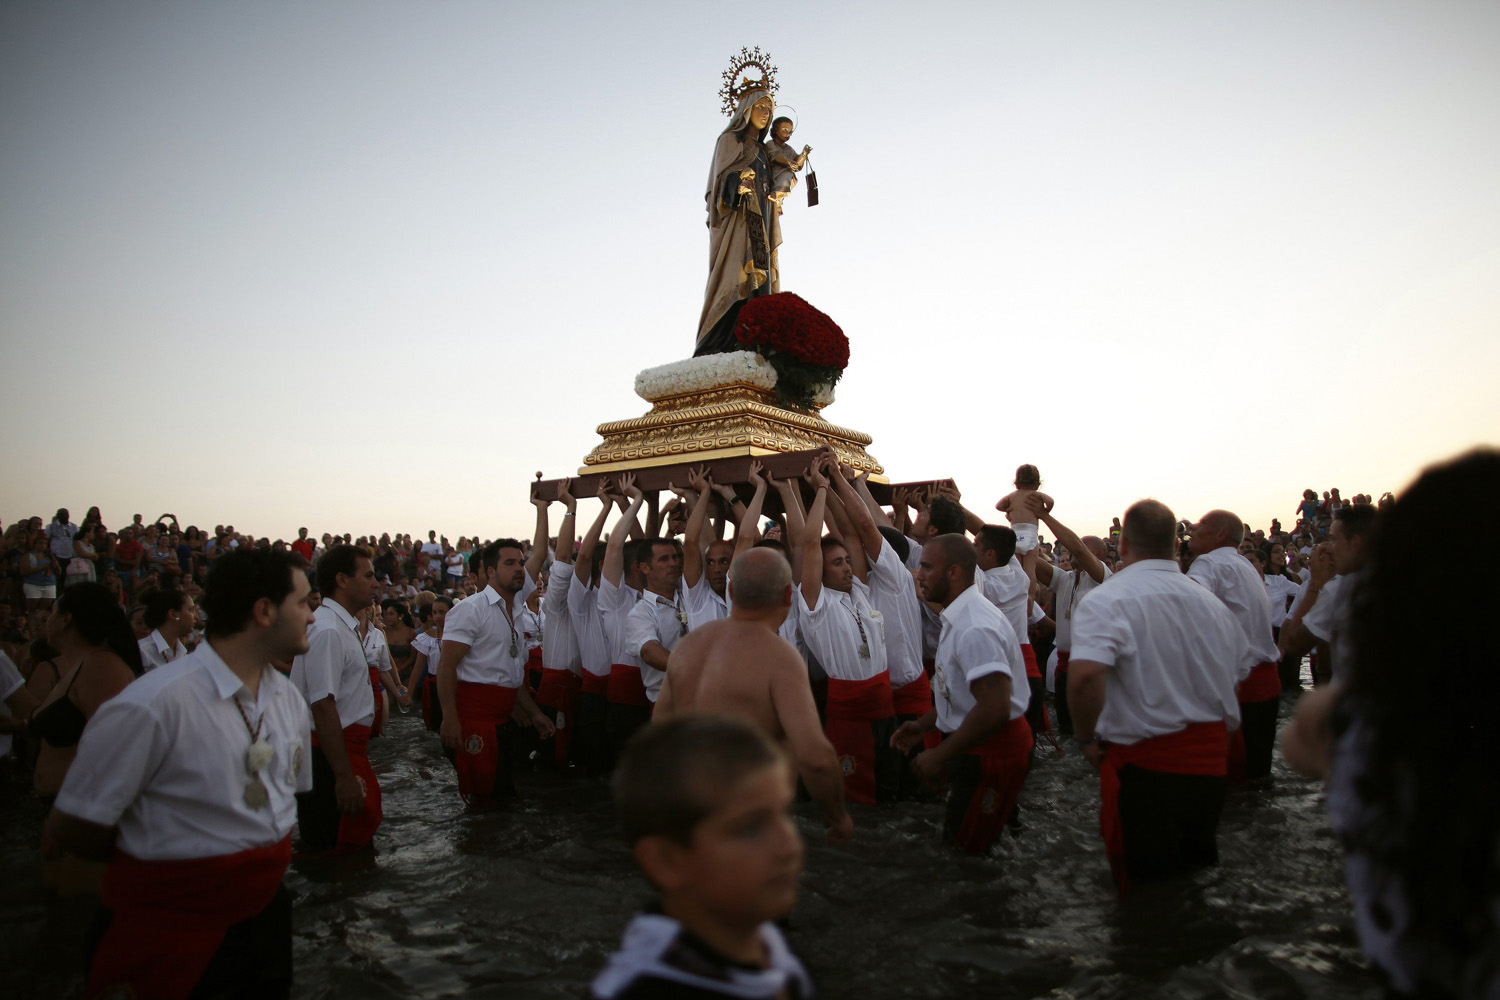 July 16, 2013. Men in traditional costumes carry a statue of the El Carmen Virgin into the sea during a procession in Malaga, southern Spain.